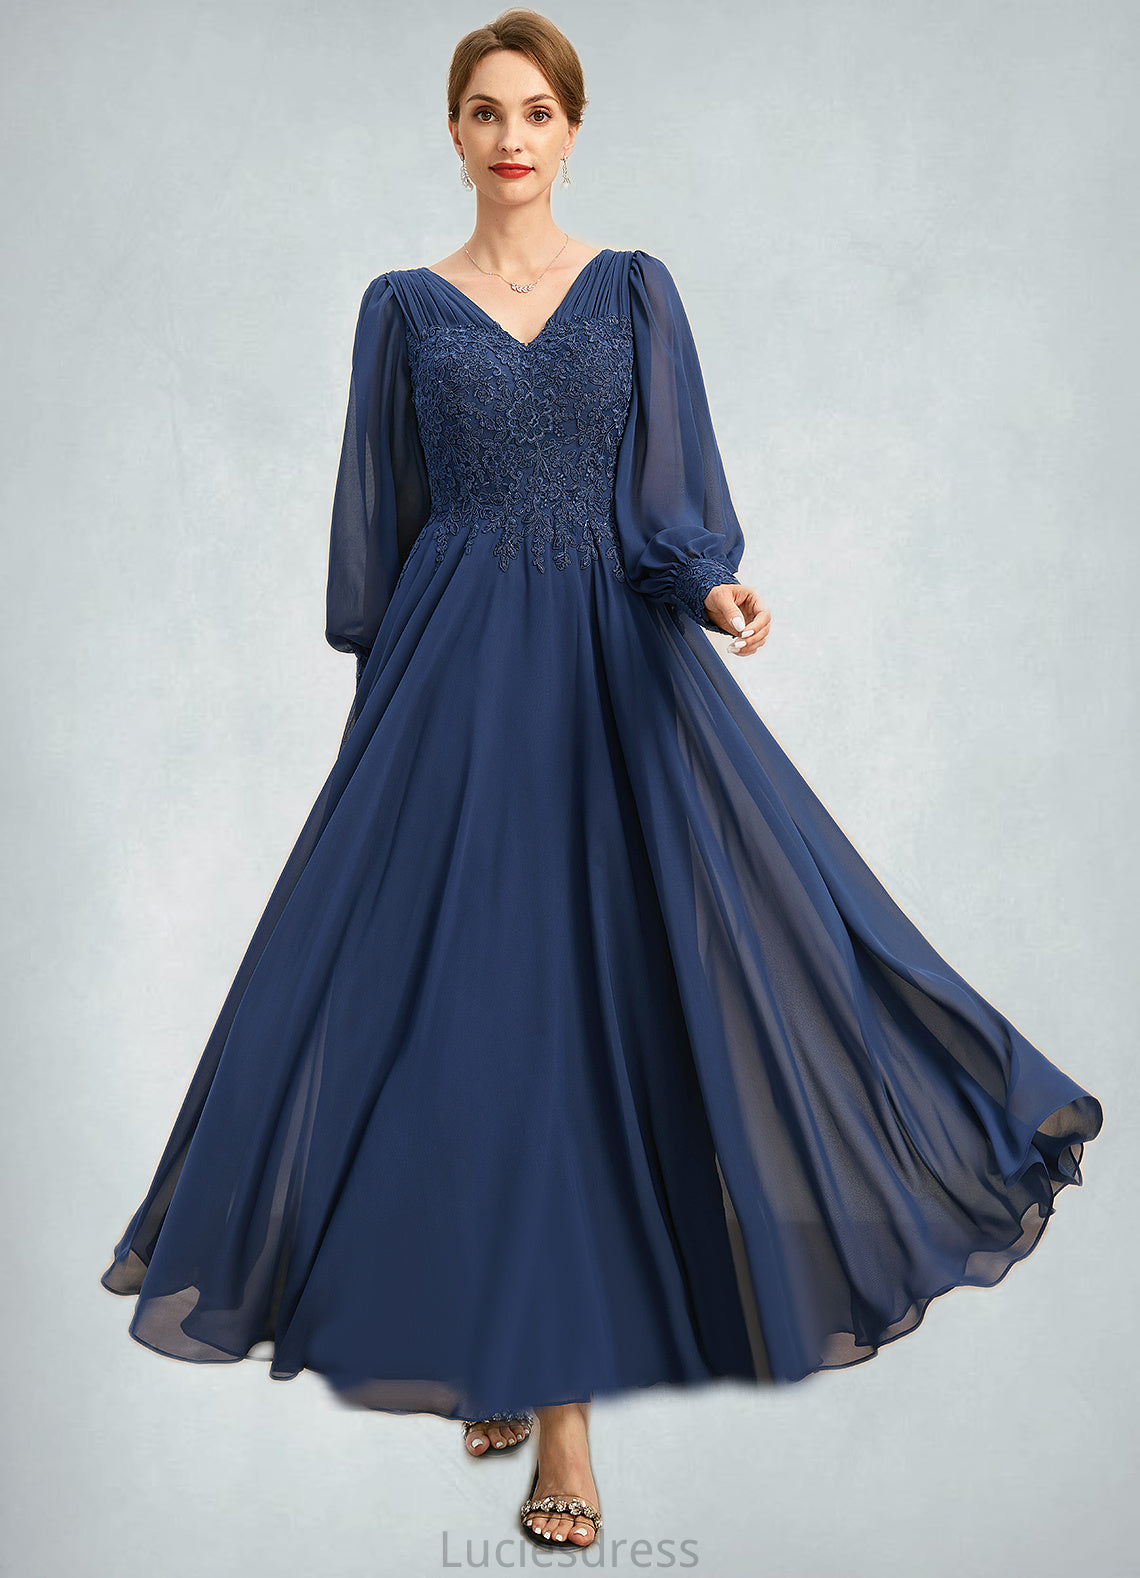 Angeline A-line V-Neck Ankle-Length Chiffon Lace Mother of the Bride Dress With Pleated HFP0021908